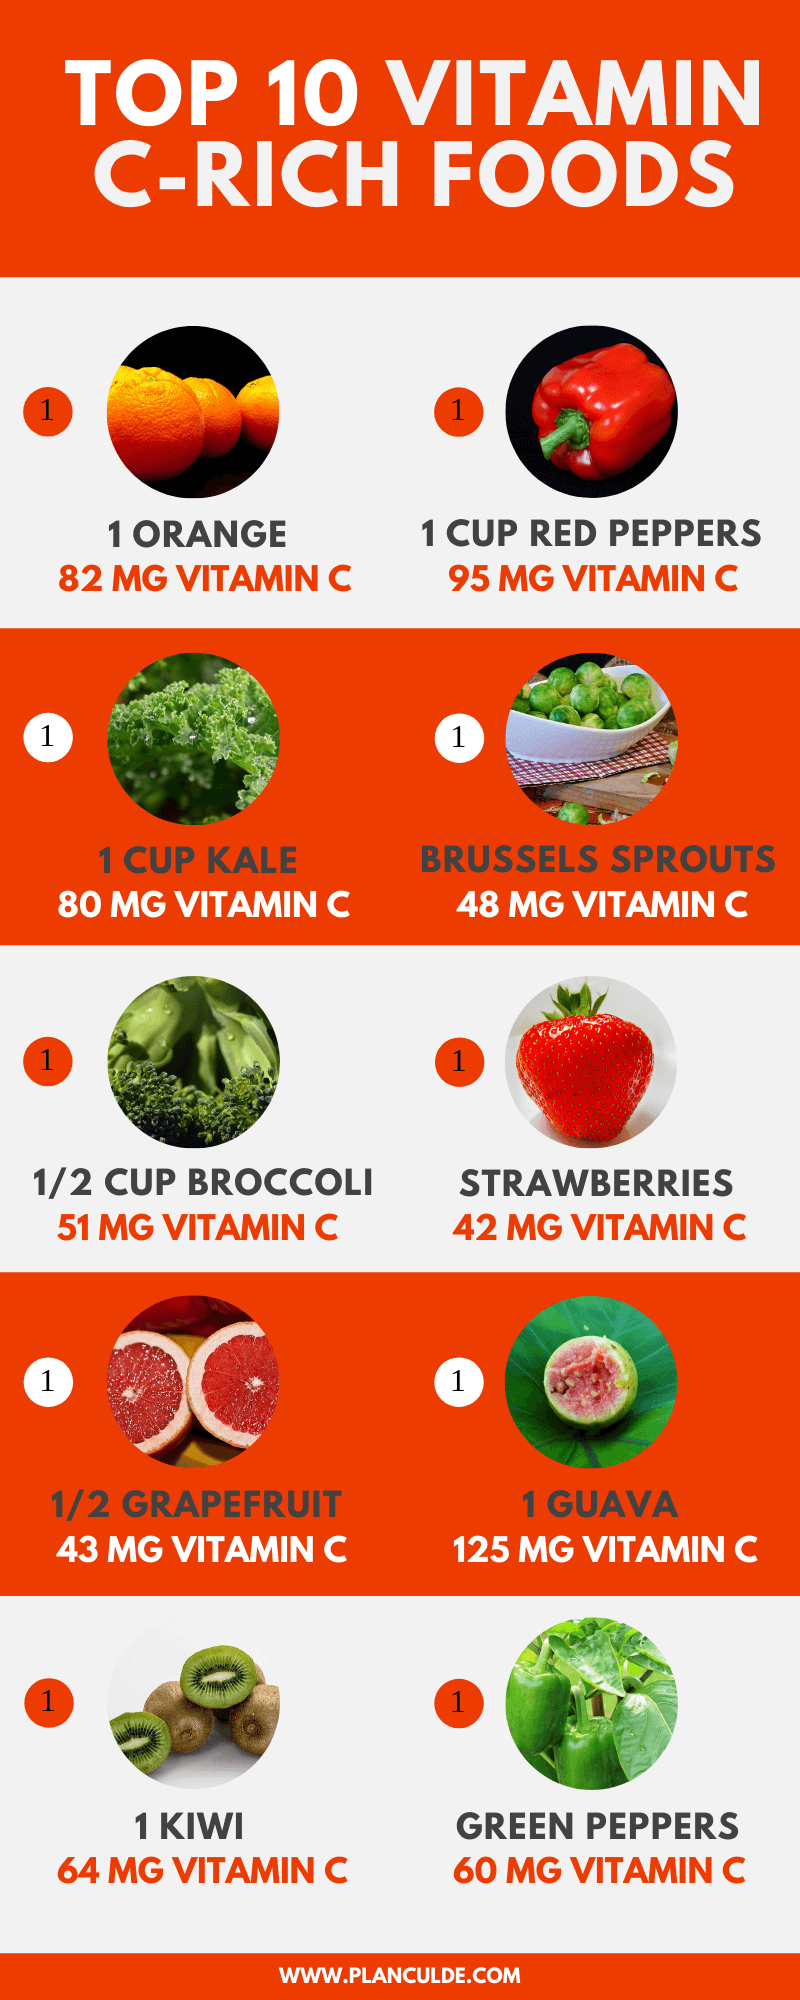 Vitamin C Foods: List of the Top 10 Foods High in Vitamin C